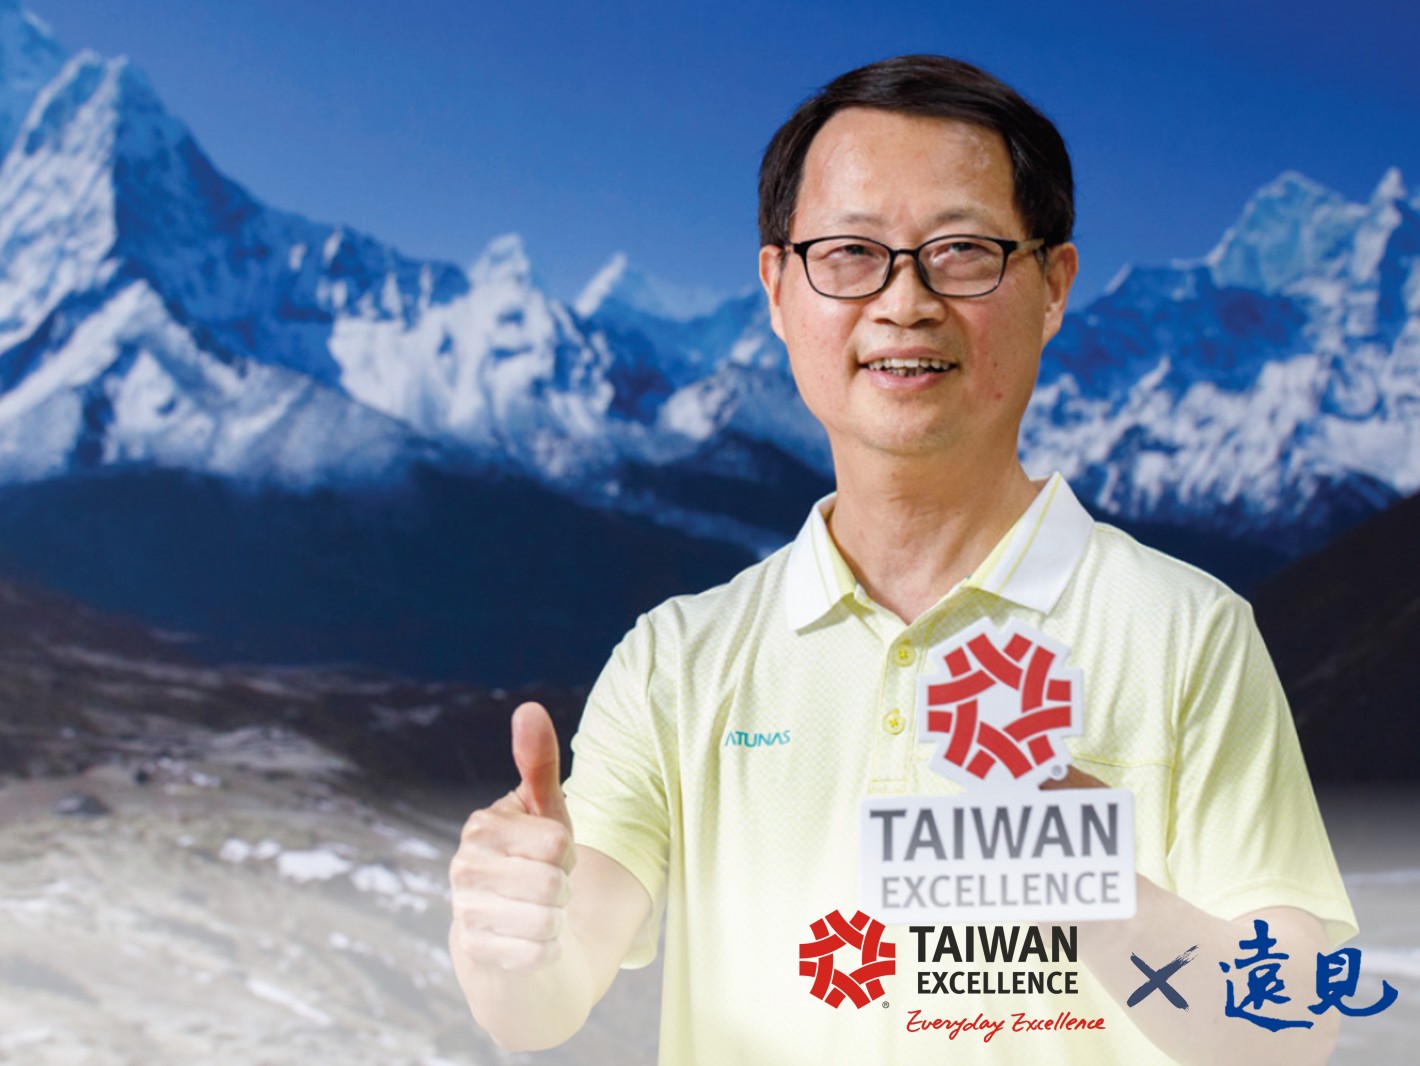 ATUNAS’s General Manager Kuo-Chin Chang praised Taiwan External Trade Development Council (TAITRA) for providing opportunities to small and medium-sized enterprises when it comes to domestic